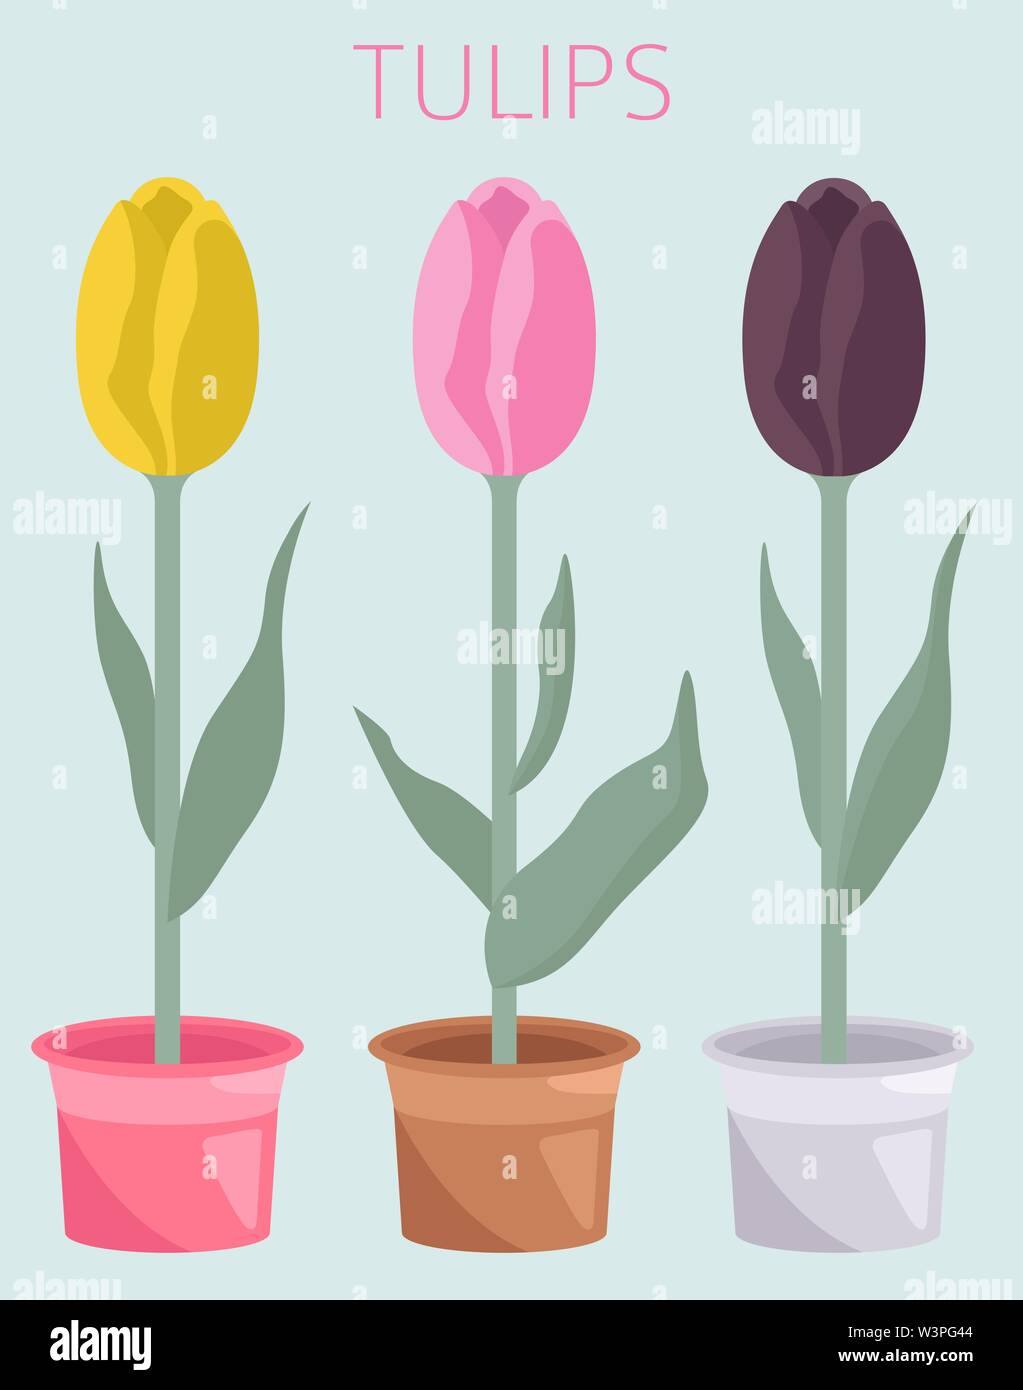 Tulip varieties flat icon set. Garden flower and house plants infographic. Vector illustration Stock Vector